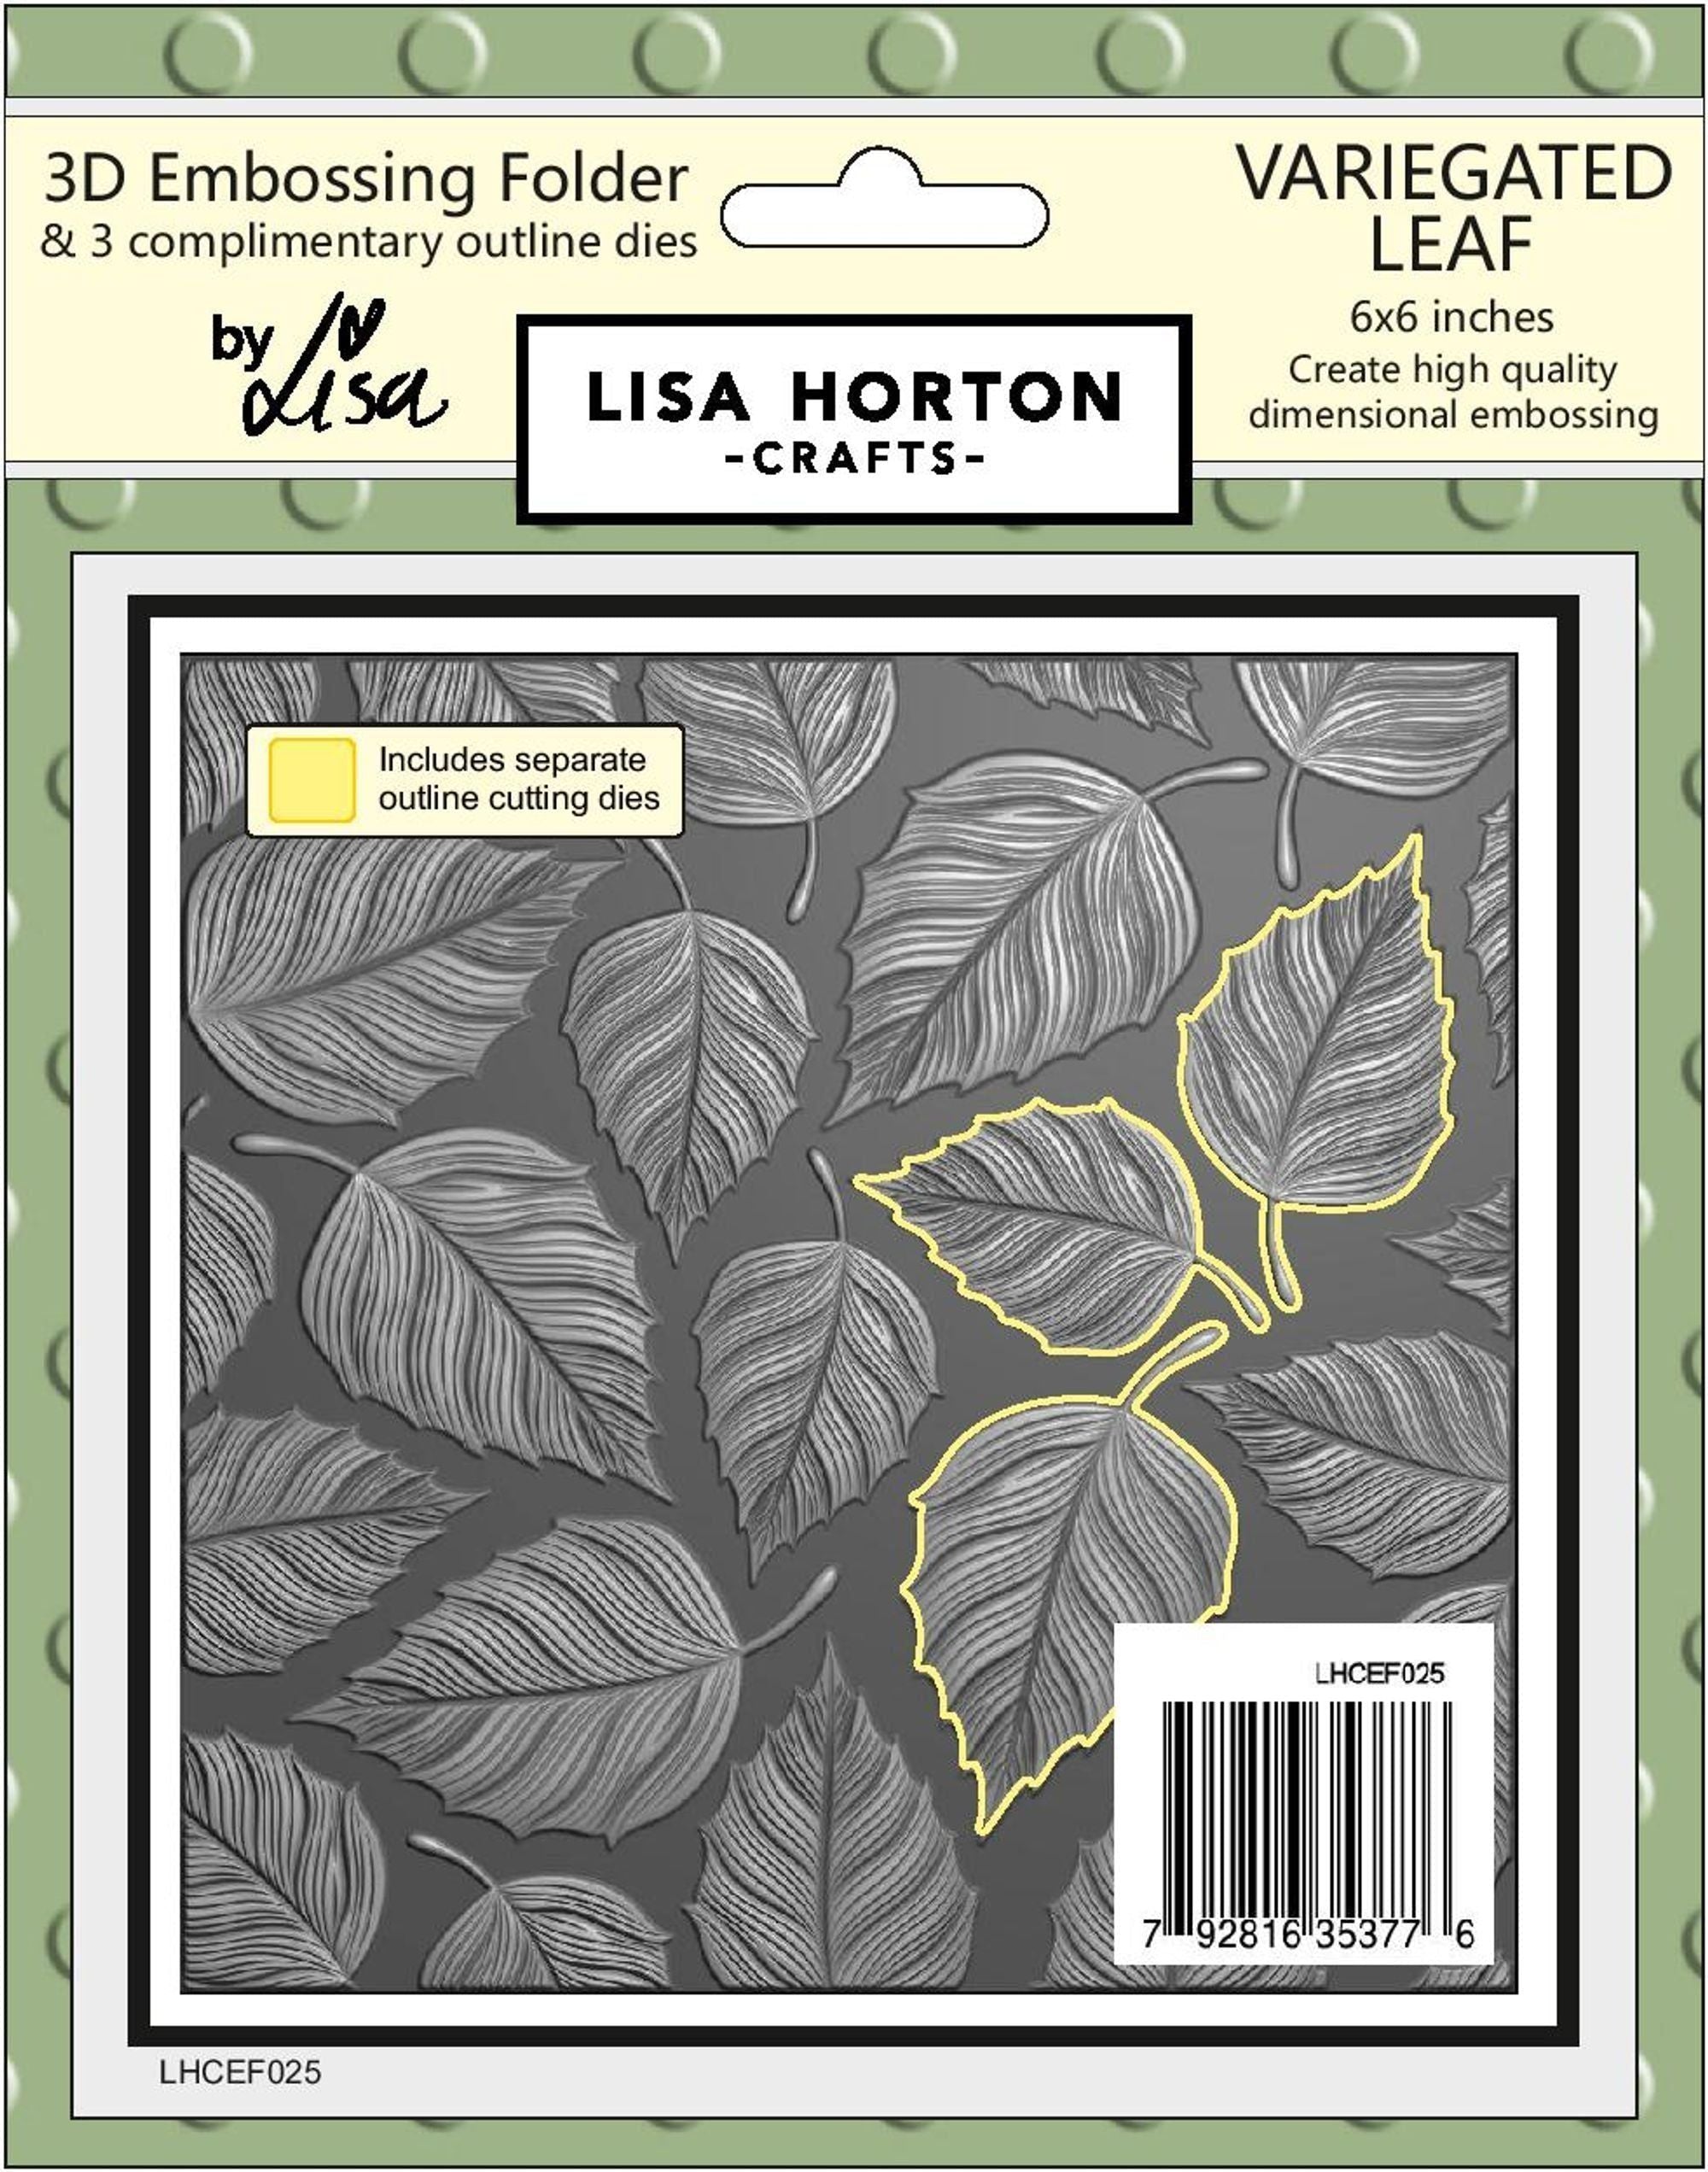 Variegated Leaf 6x6 3D Embossing Folder With Cutting Die